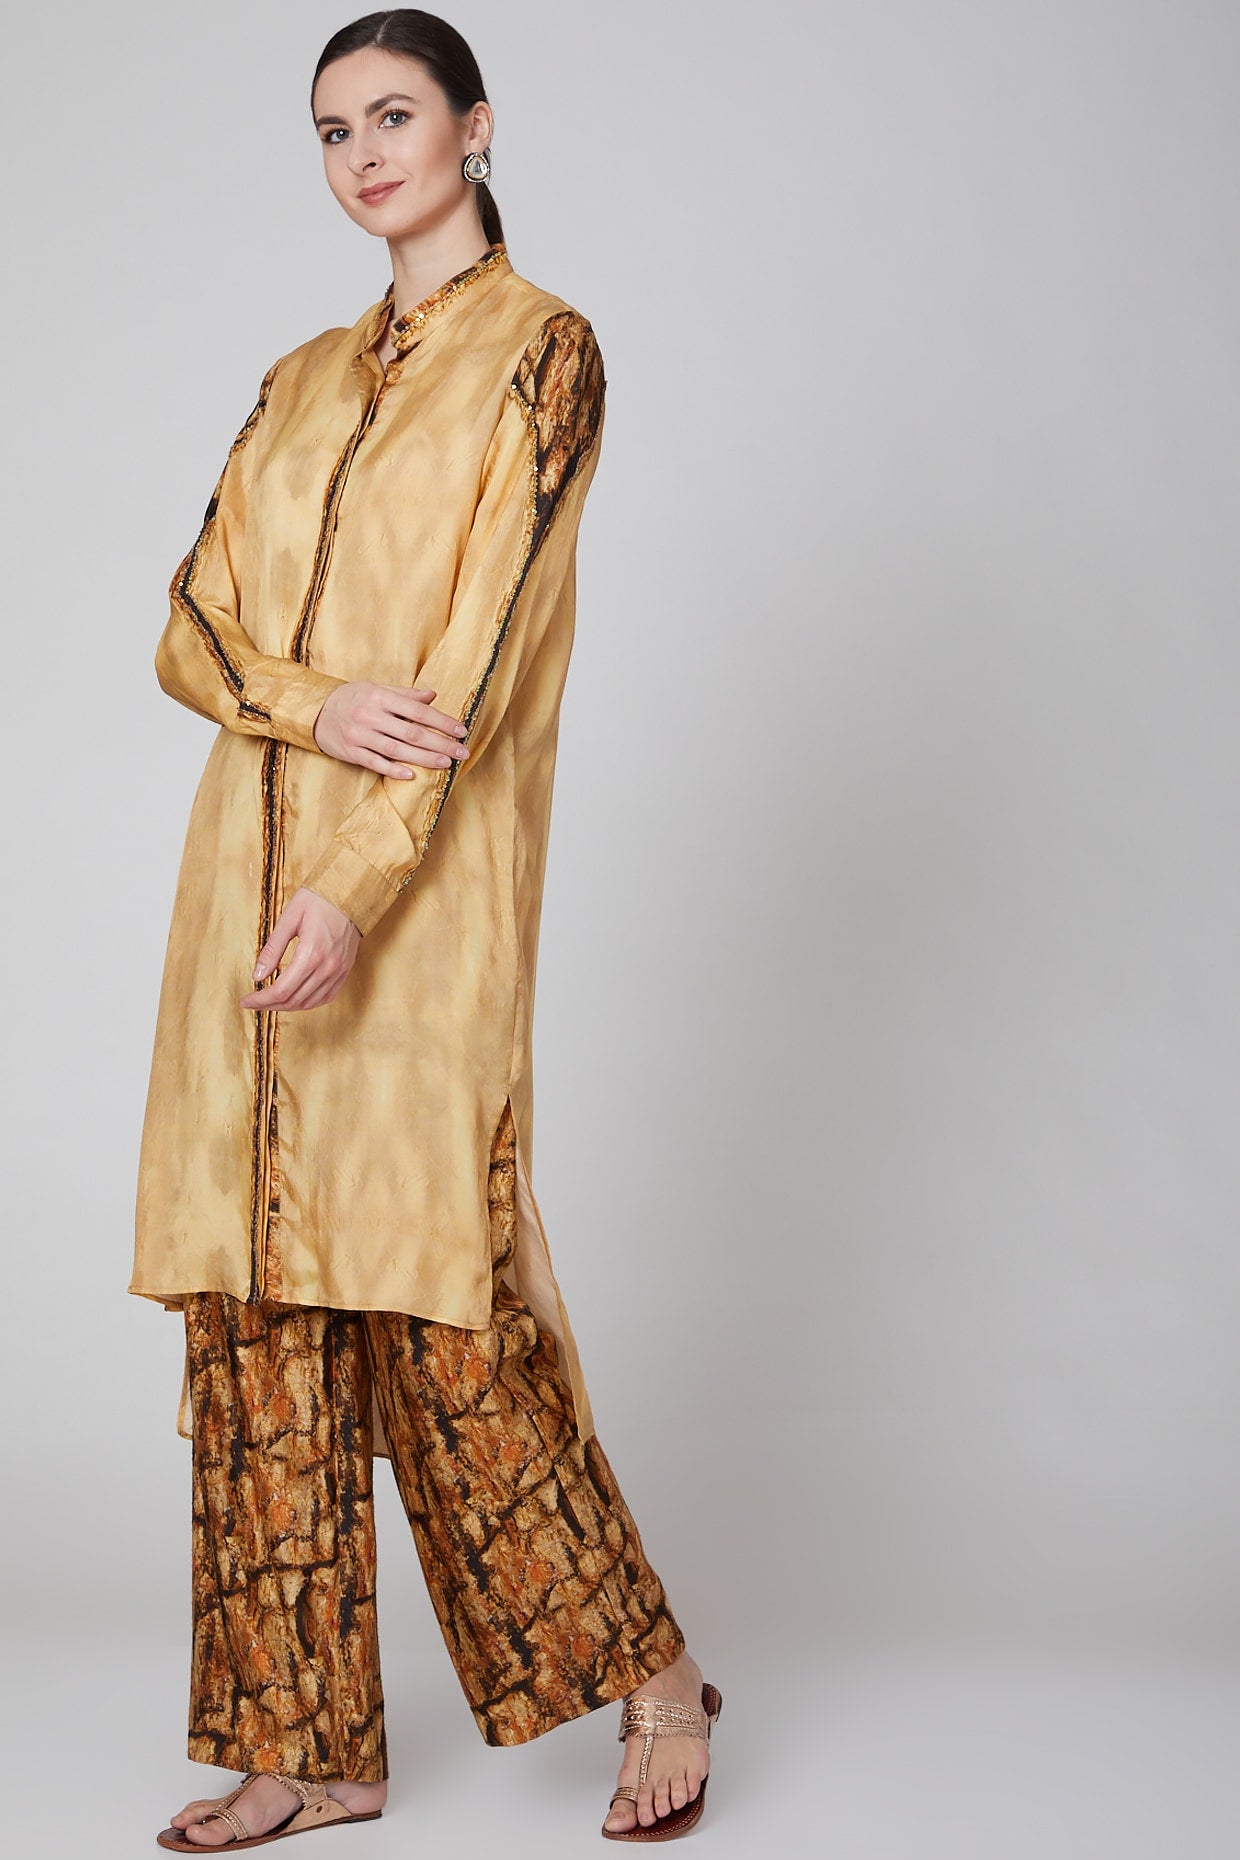 Gold Printed Tunic With Brown Pants